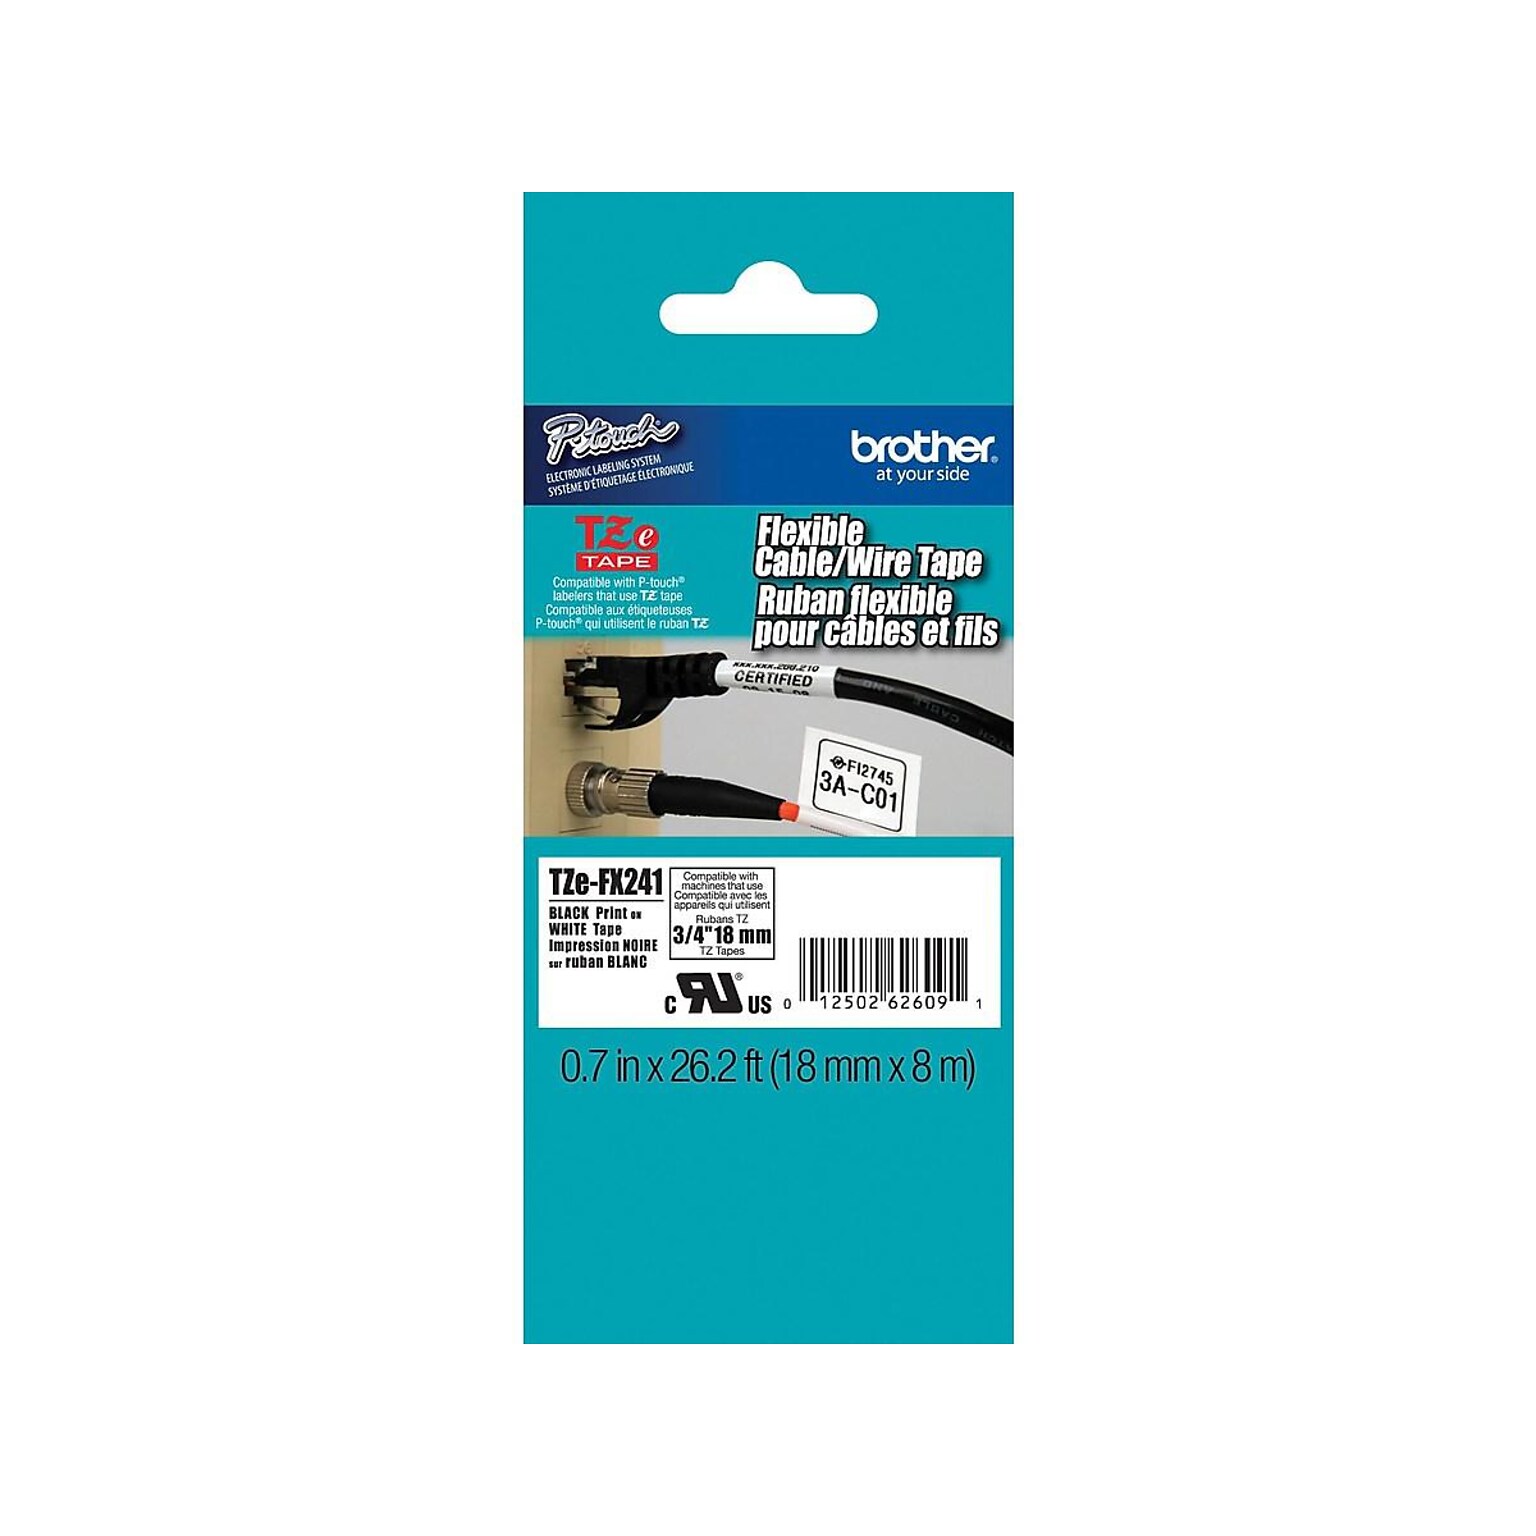 Brother P-touch TZe-FX241 Laminated Flexible ID Label Maker Tape, 3/4 x 26-2/10, Black on White (TZe-FX241)